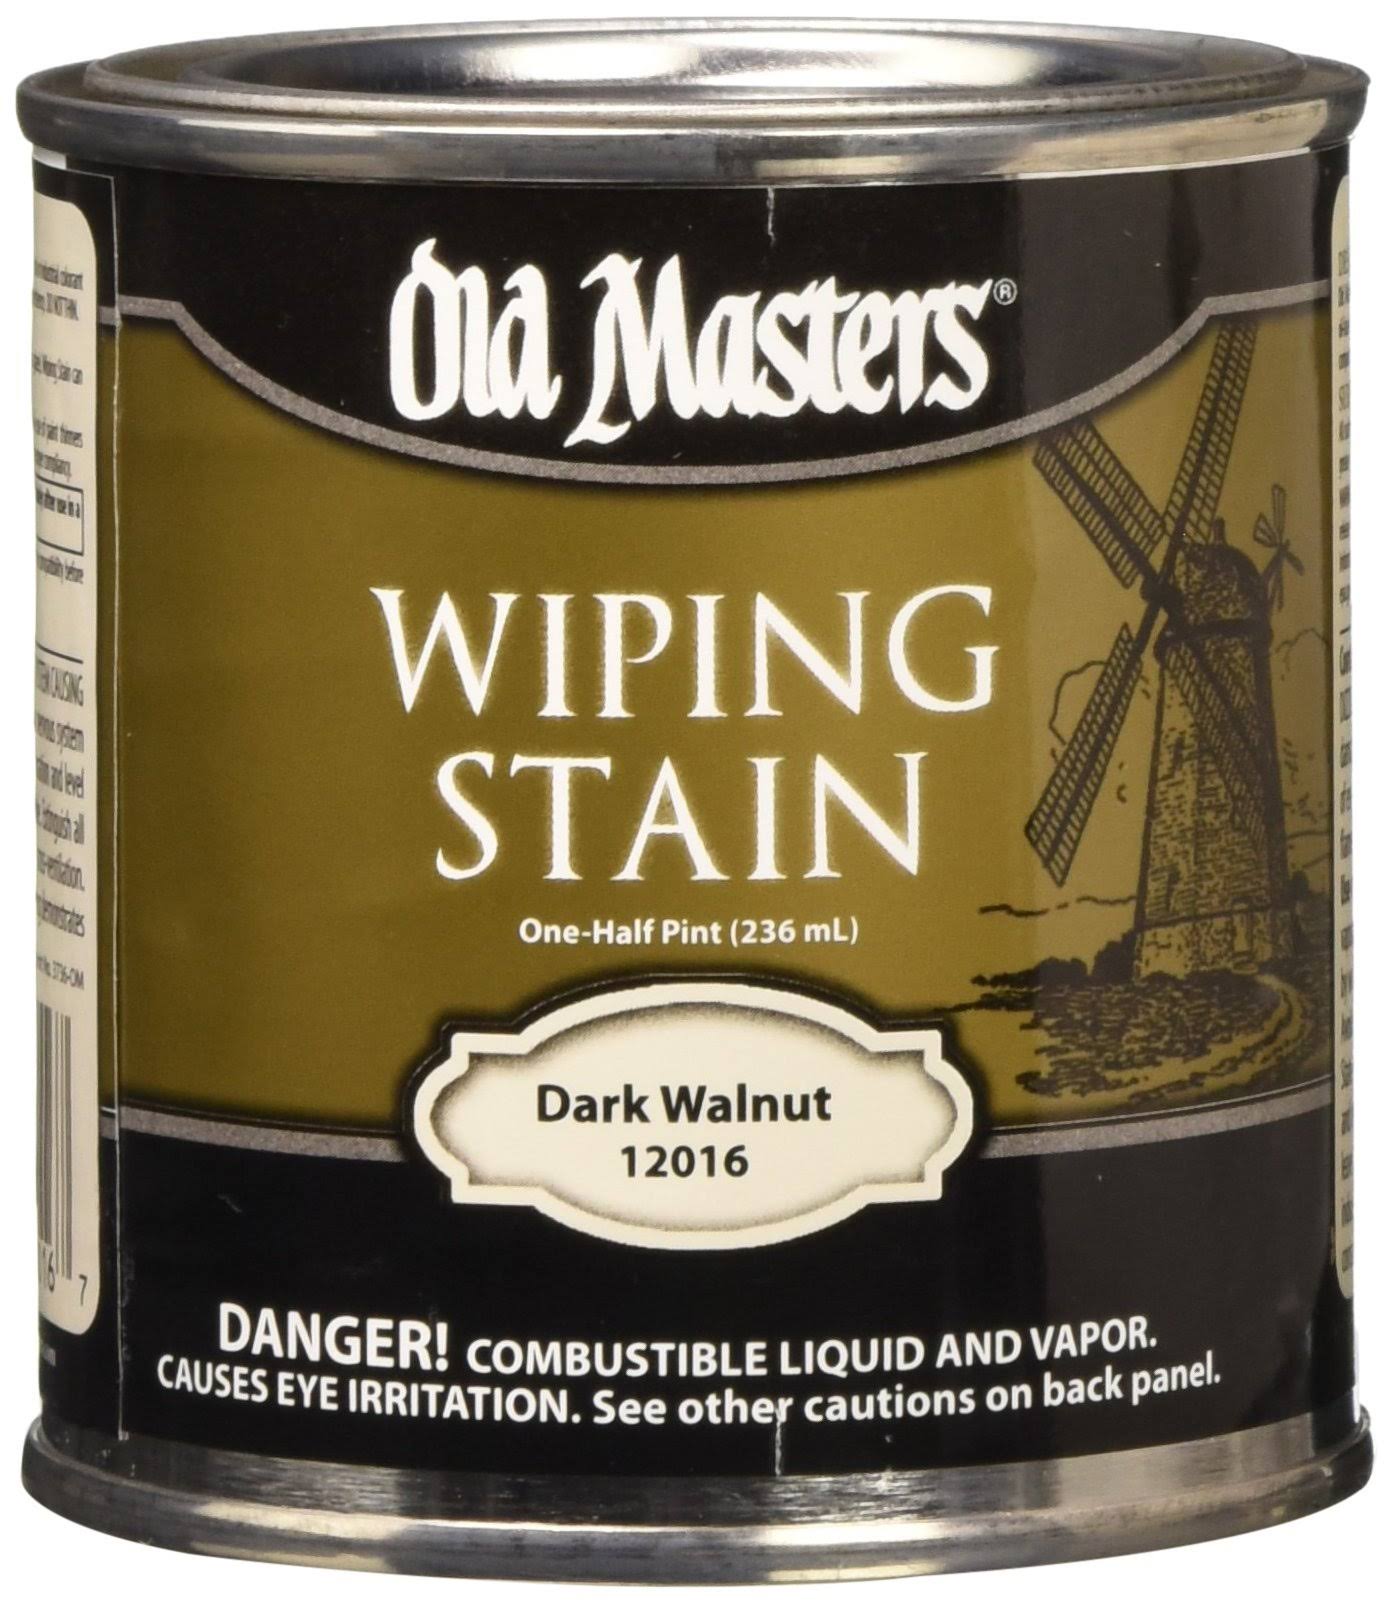 Old Masters 12016 Wiping Stain, Dark Walnut, Liquid, 0.5 pt, Can